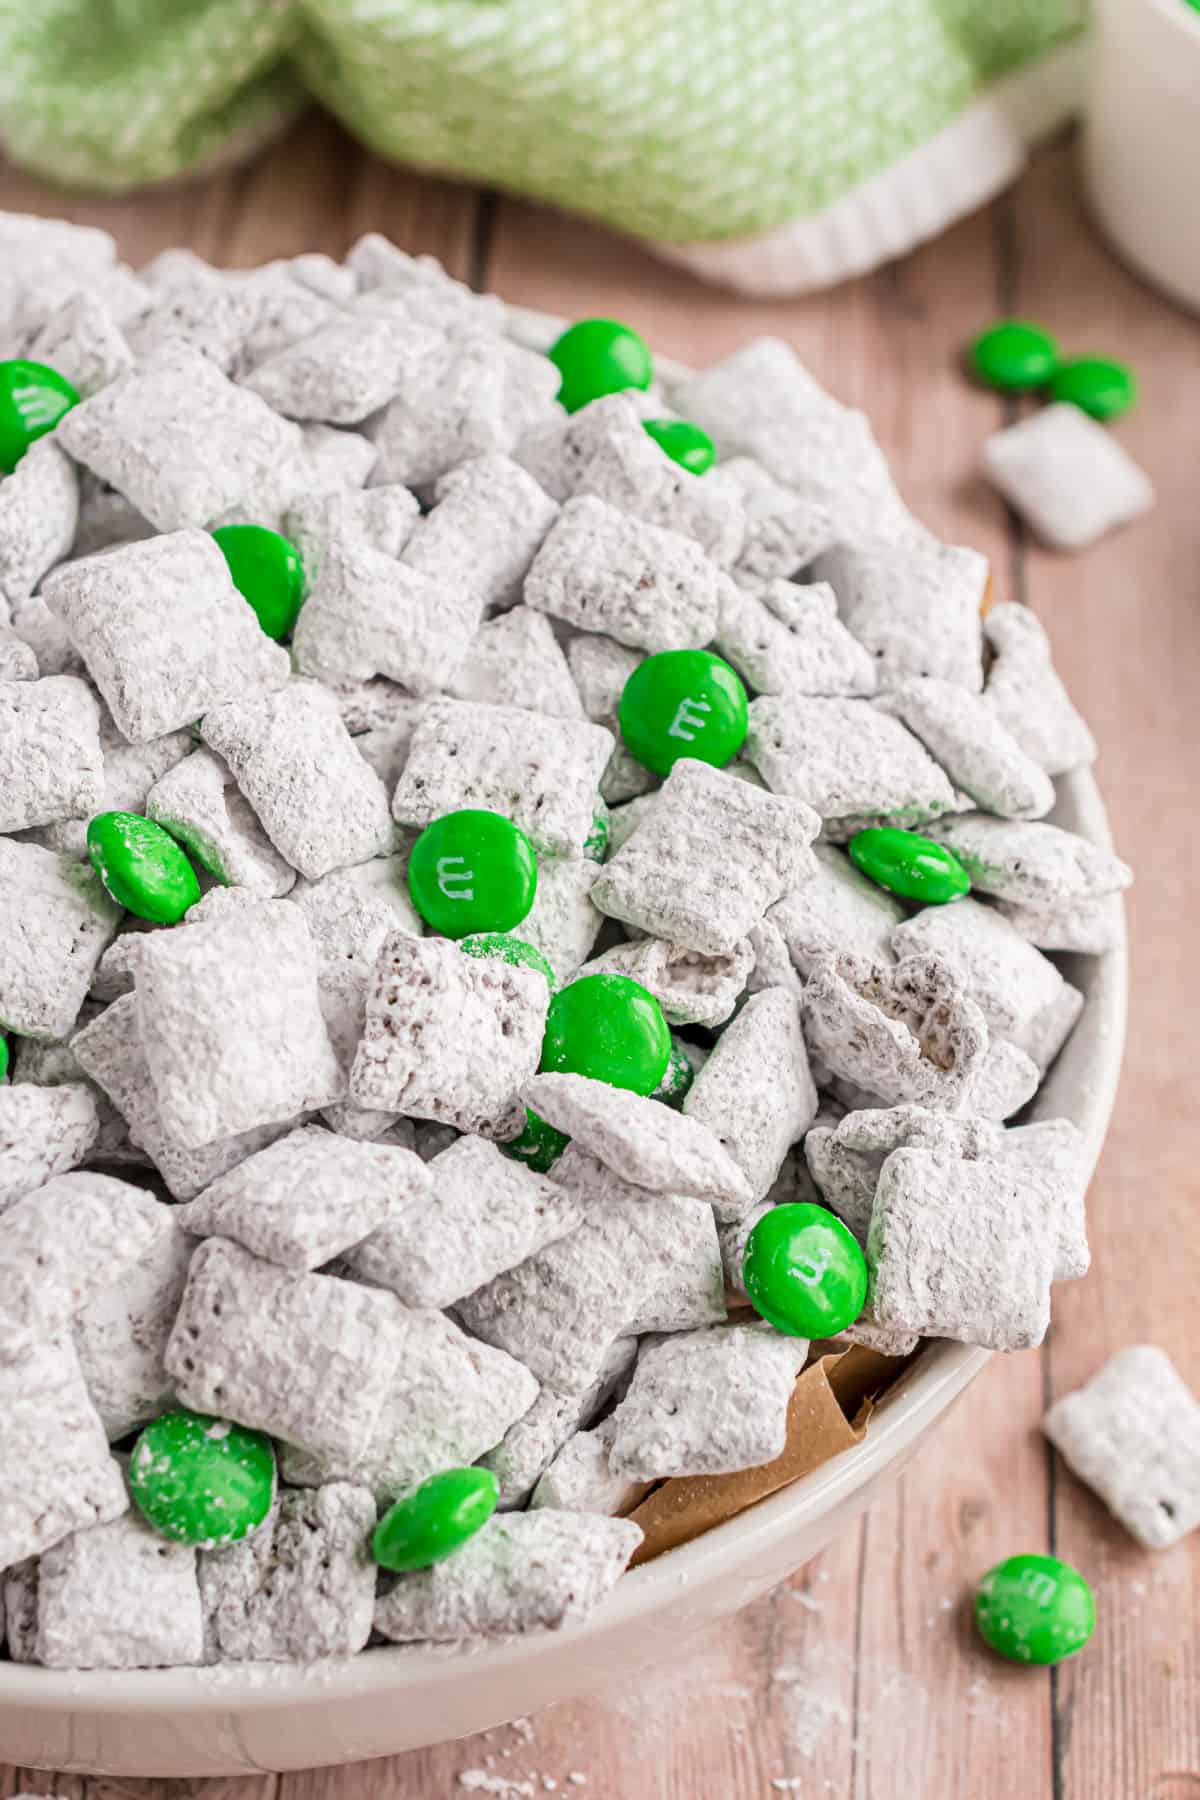 Thin mint puppy chow served in a white bowl with green min M&M candies.